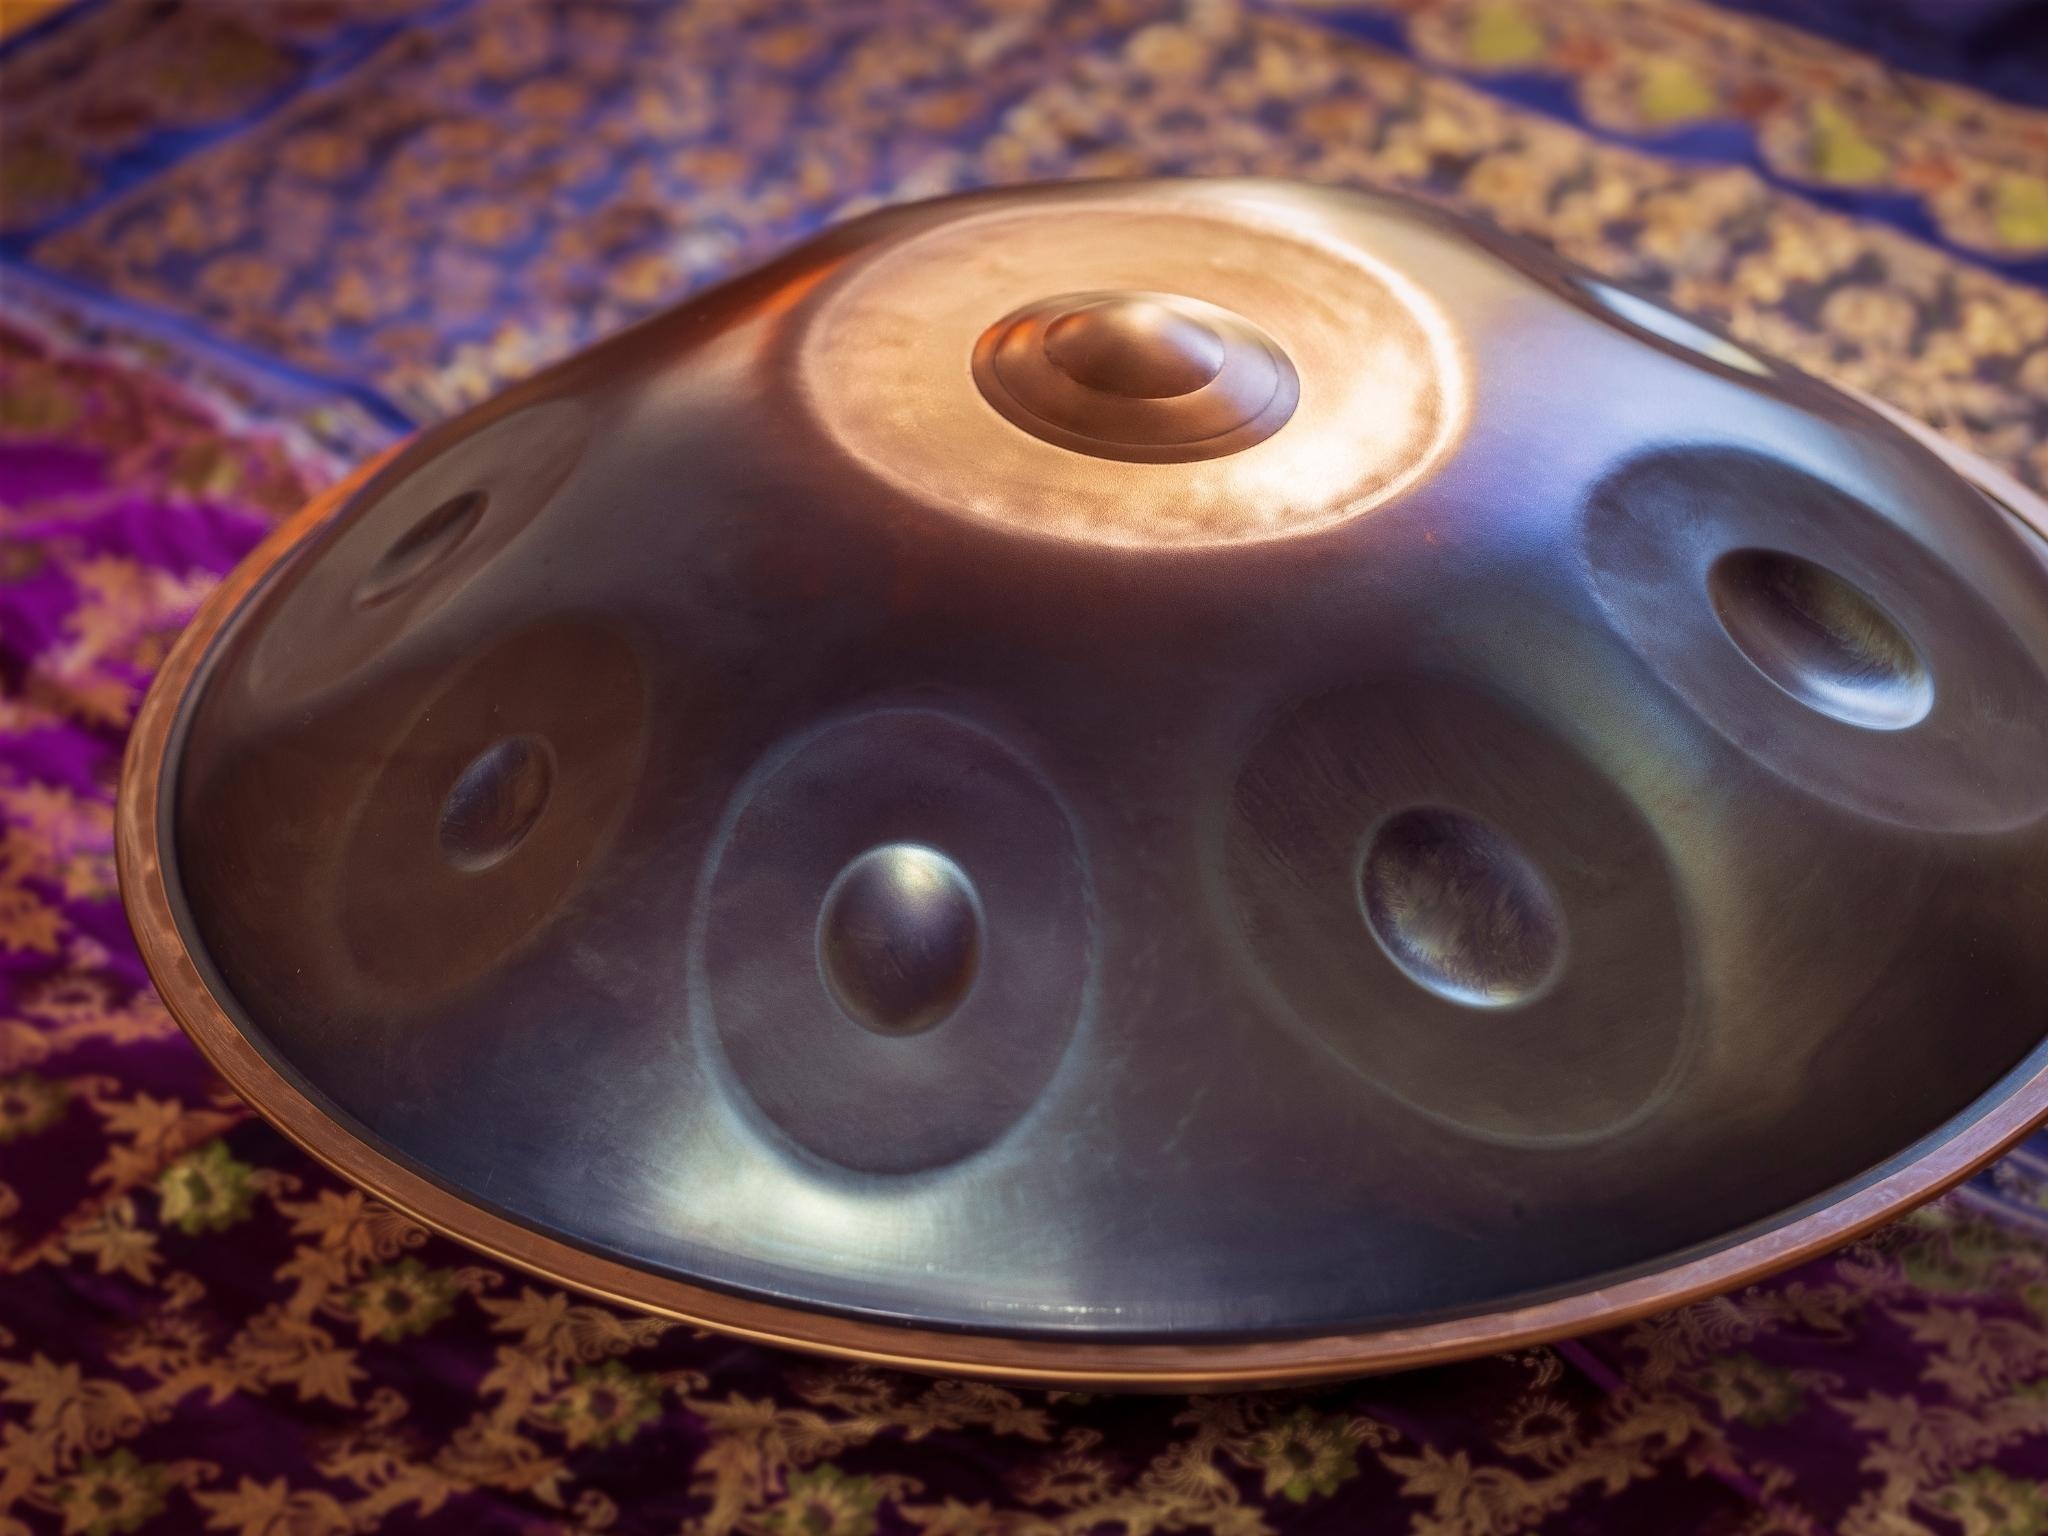 Hang (Instrument): Handpan music, Hypnotic notes and relaxed vibes, Music instrument made of metal. 2050x1540 HD Wallpaper.